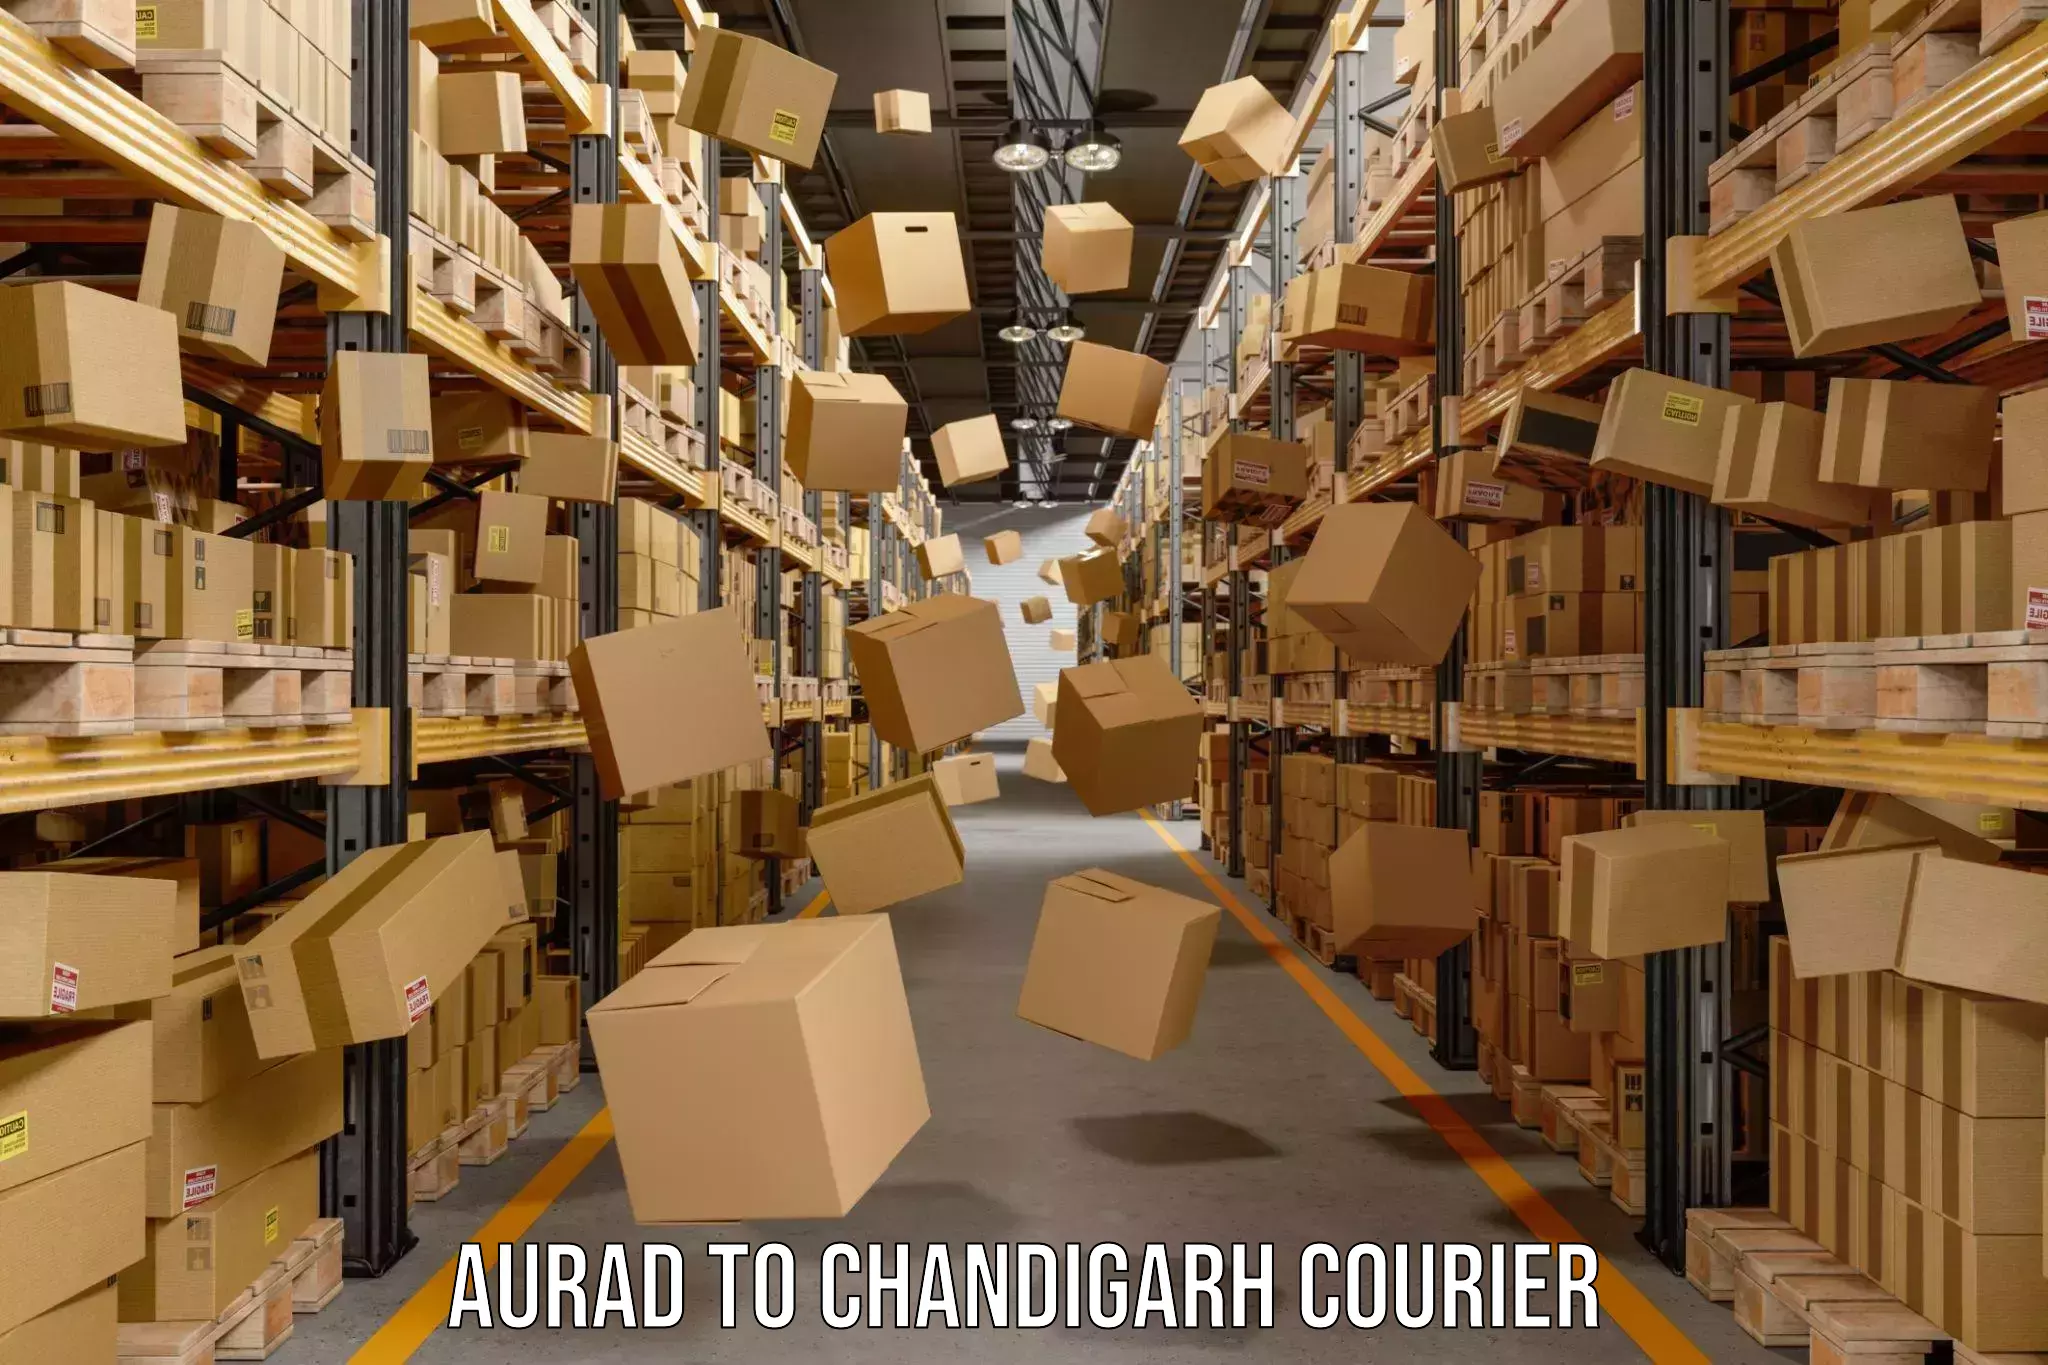 Express shipping in Aurad to Chandigarh